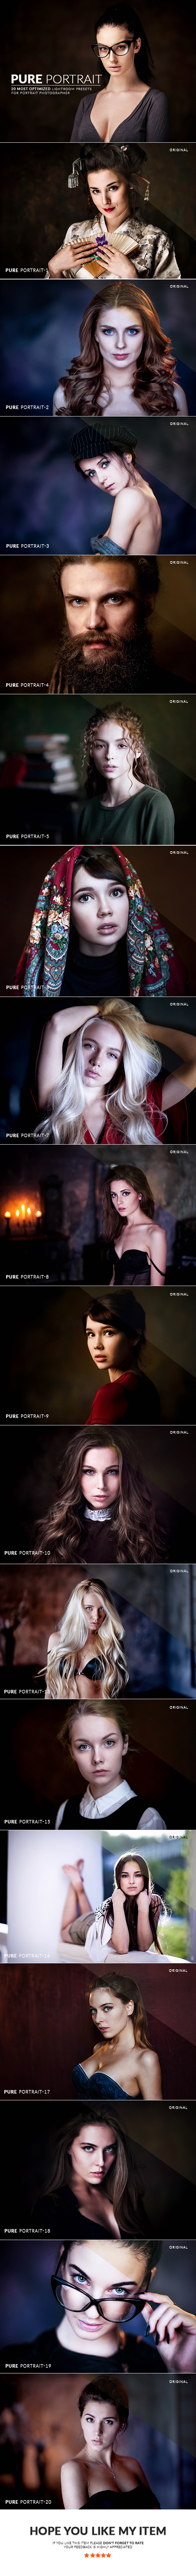 20 Pure Portrait Lightroom Presets by Straightdesign | GraphicRiver 